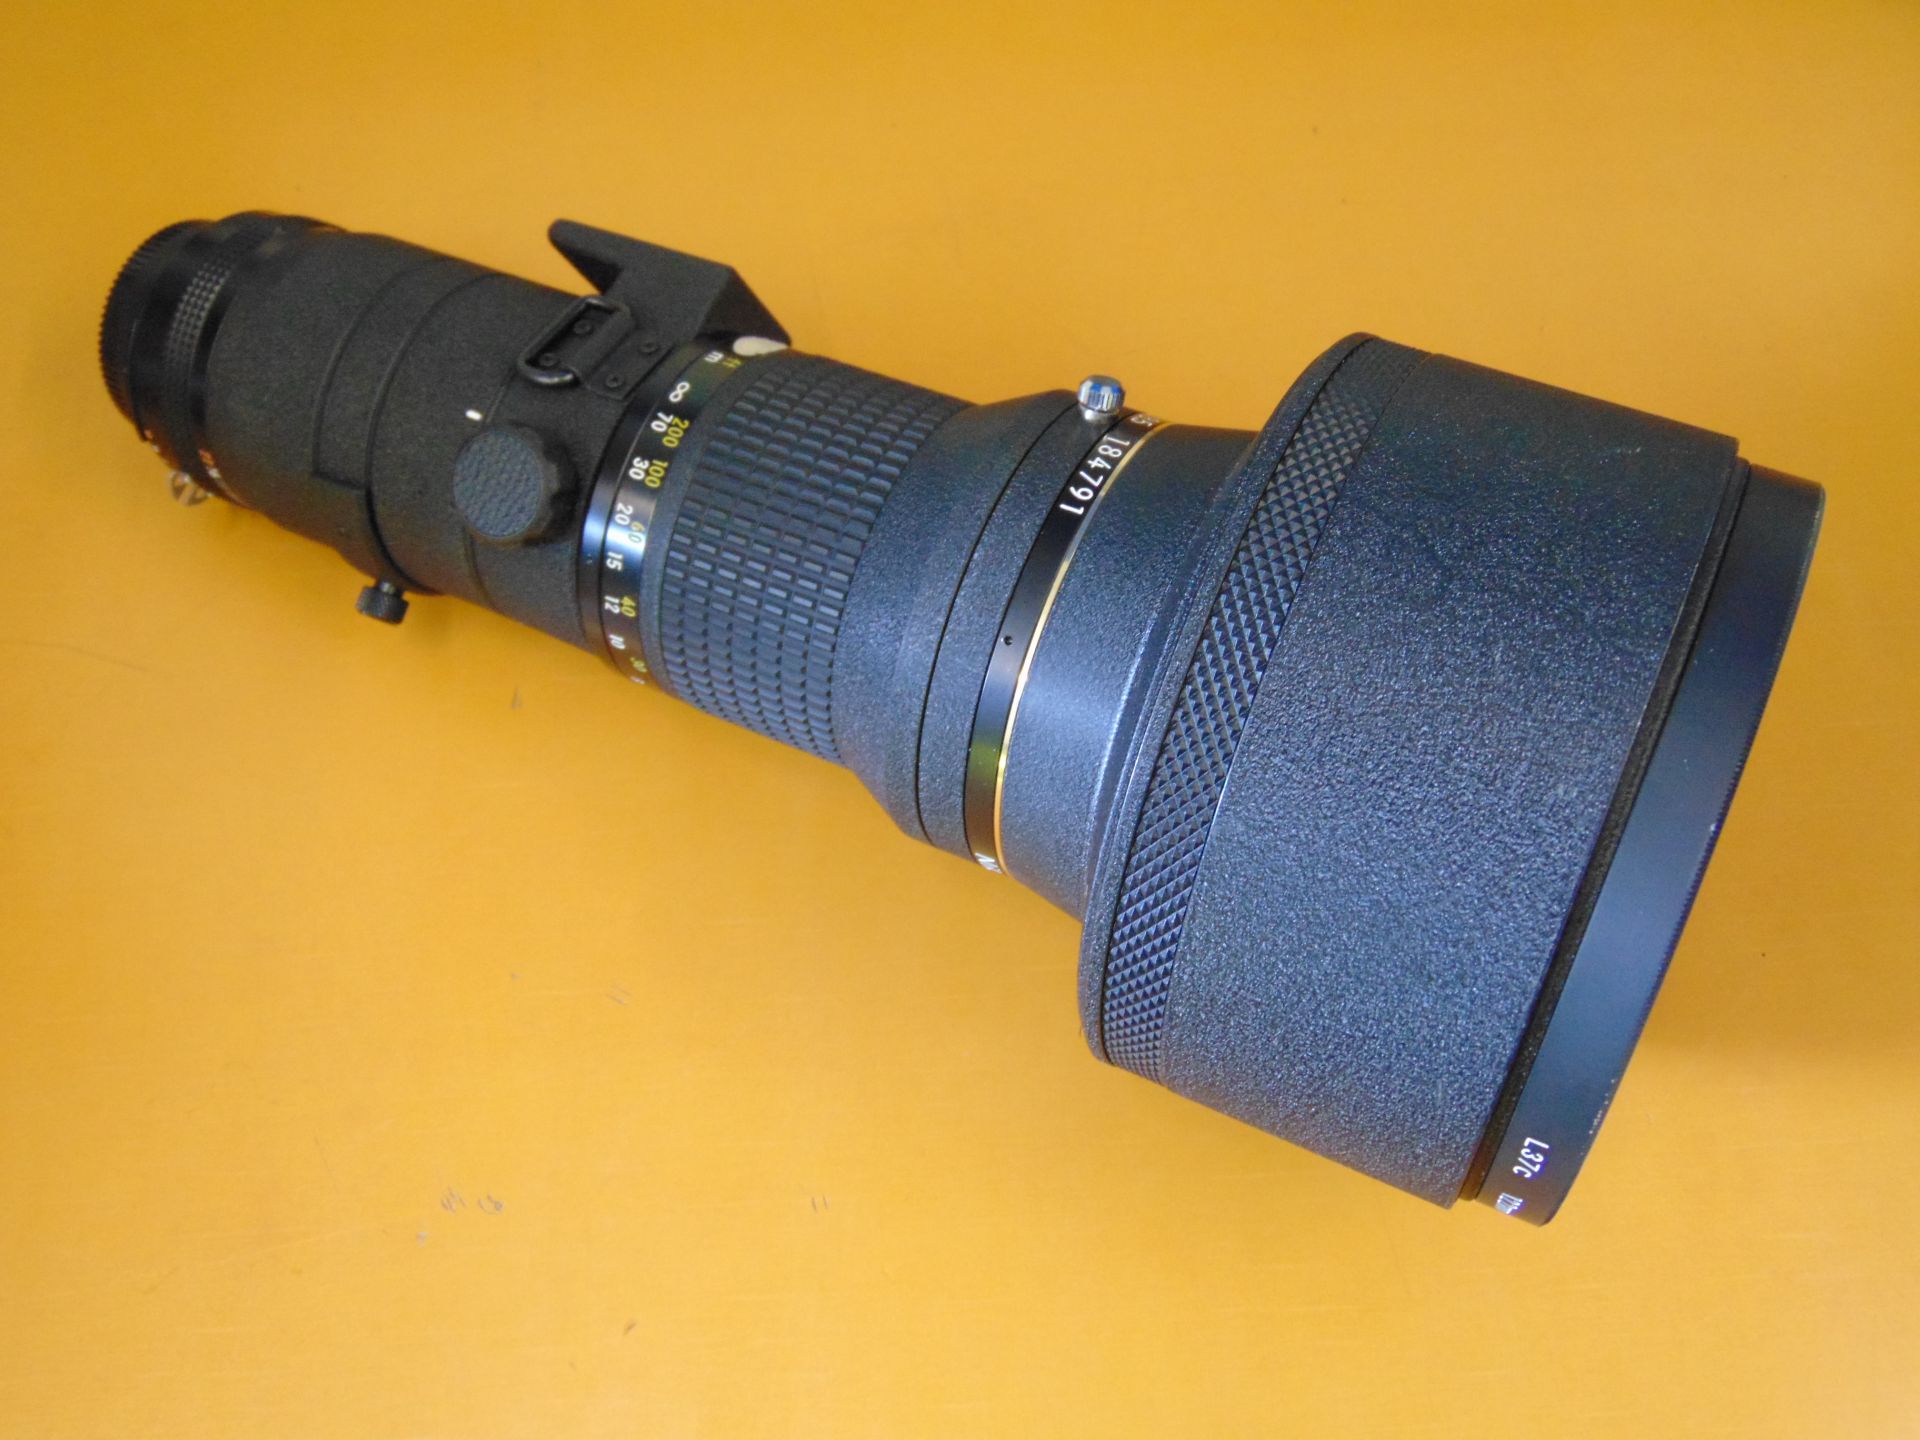 Nikon Nikkor ED 400mm 1:3.5 Lense with Leather Carry Case - Image 2 of 11